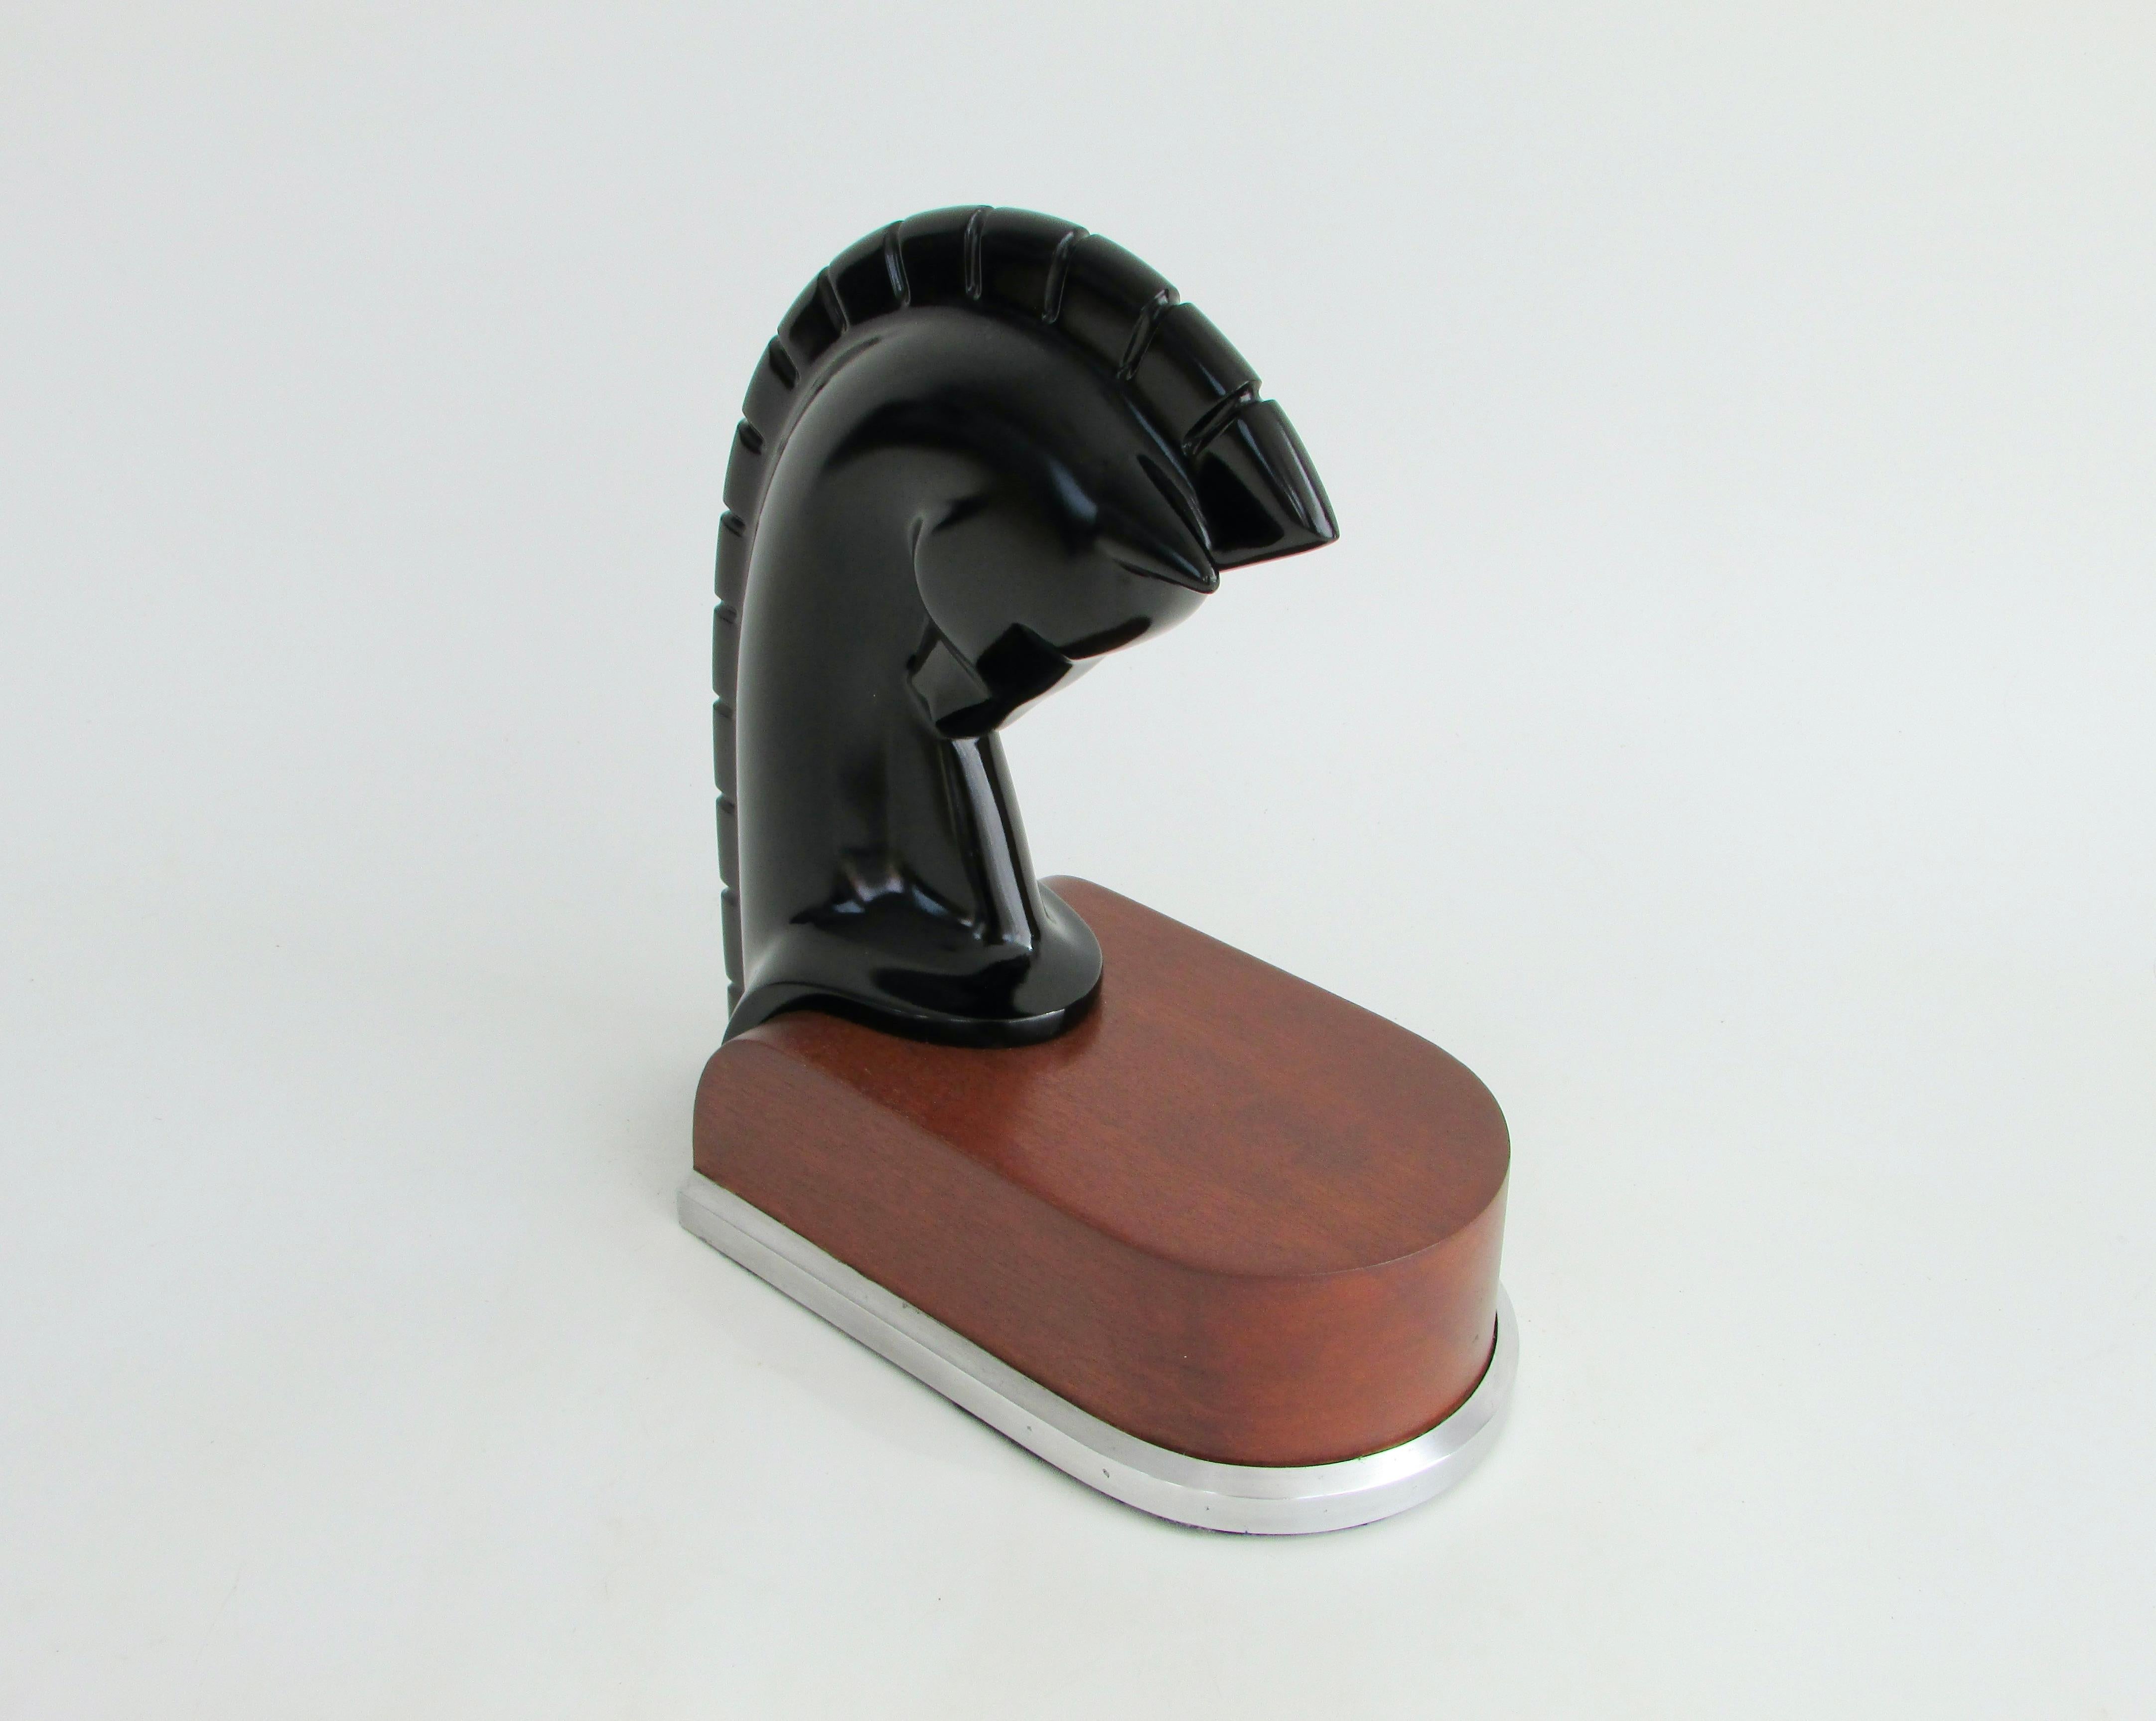 Nicely done stylized horse head sculpture in black lacquer . Sculpture sits on streamlined wood base trimmed in aluminum . 